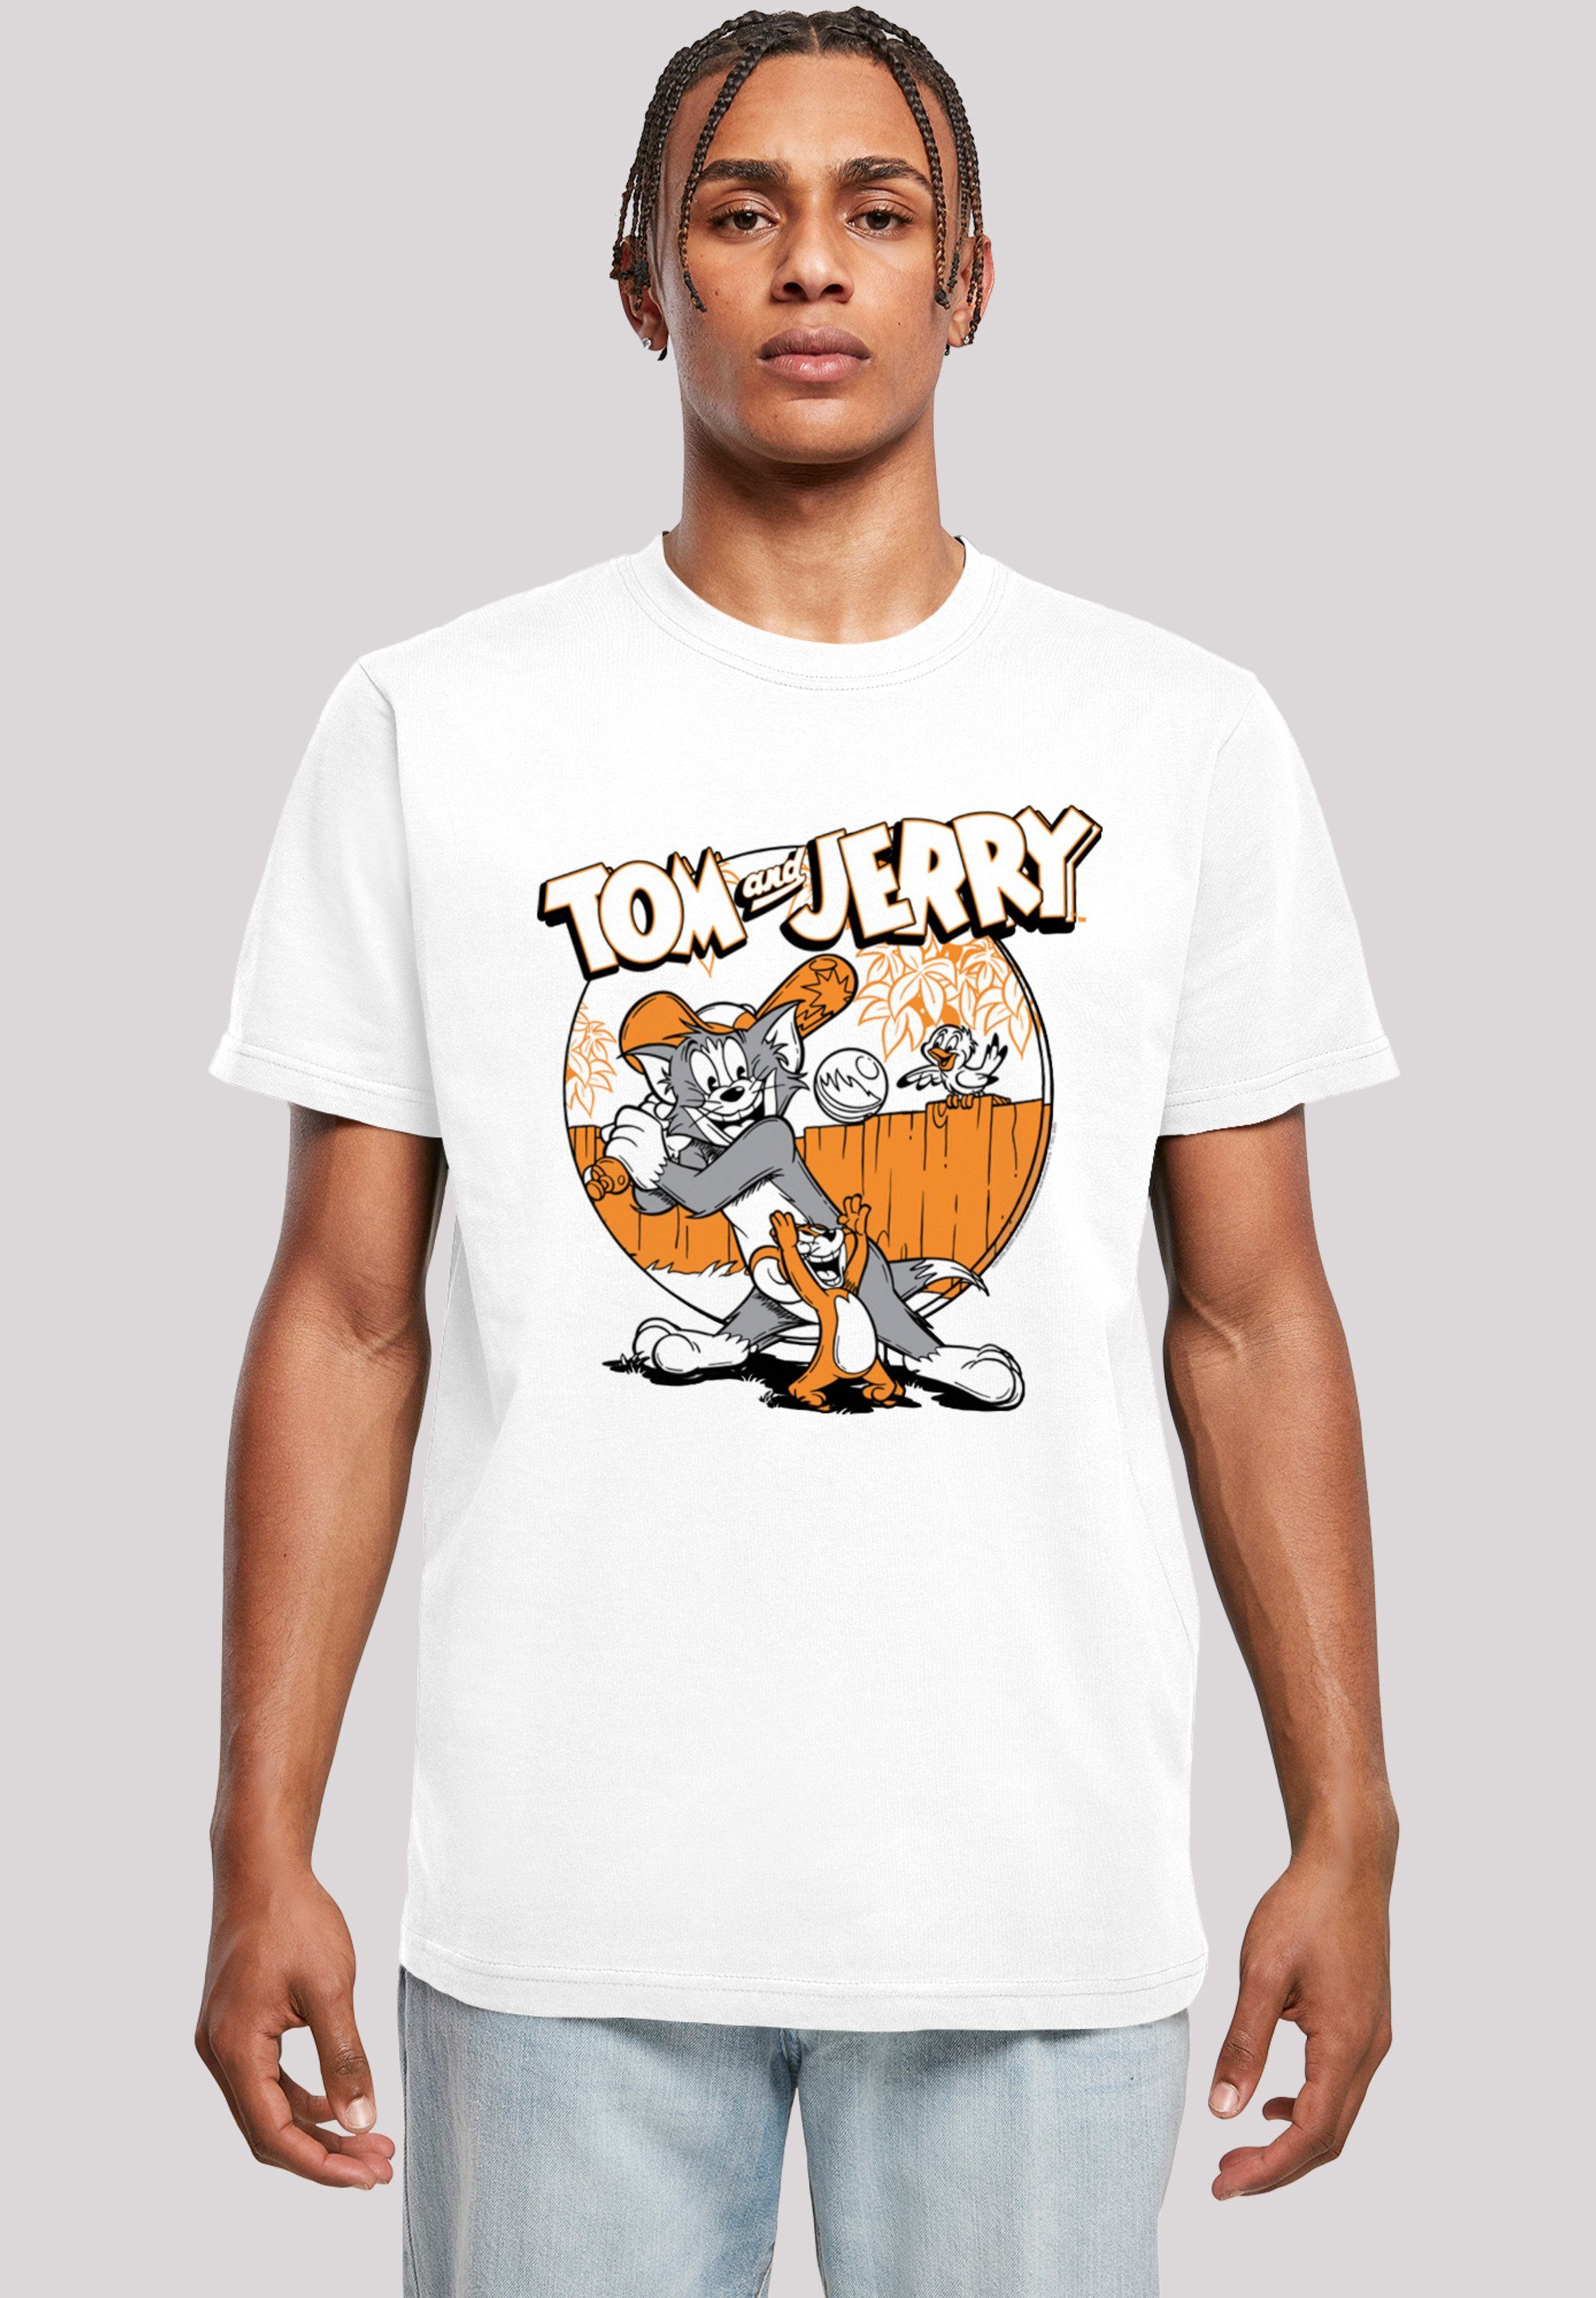 Jerry Baseball Offiziell lizenziertes T-Shirt Play Tom F4NT4STIC and Tom Print, Serie T-Shirt And Jerry TV